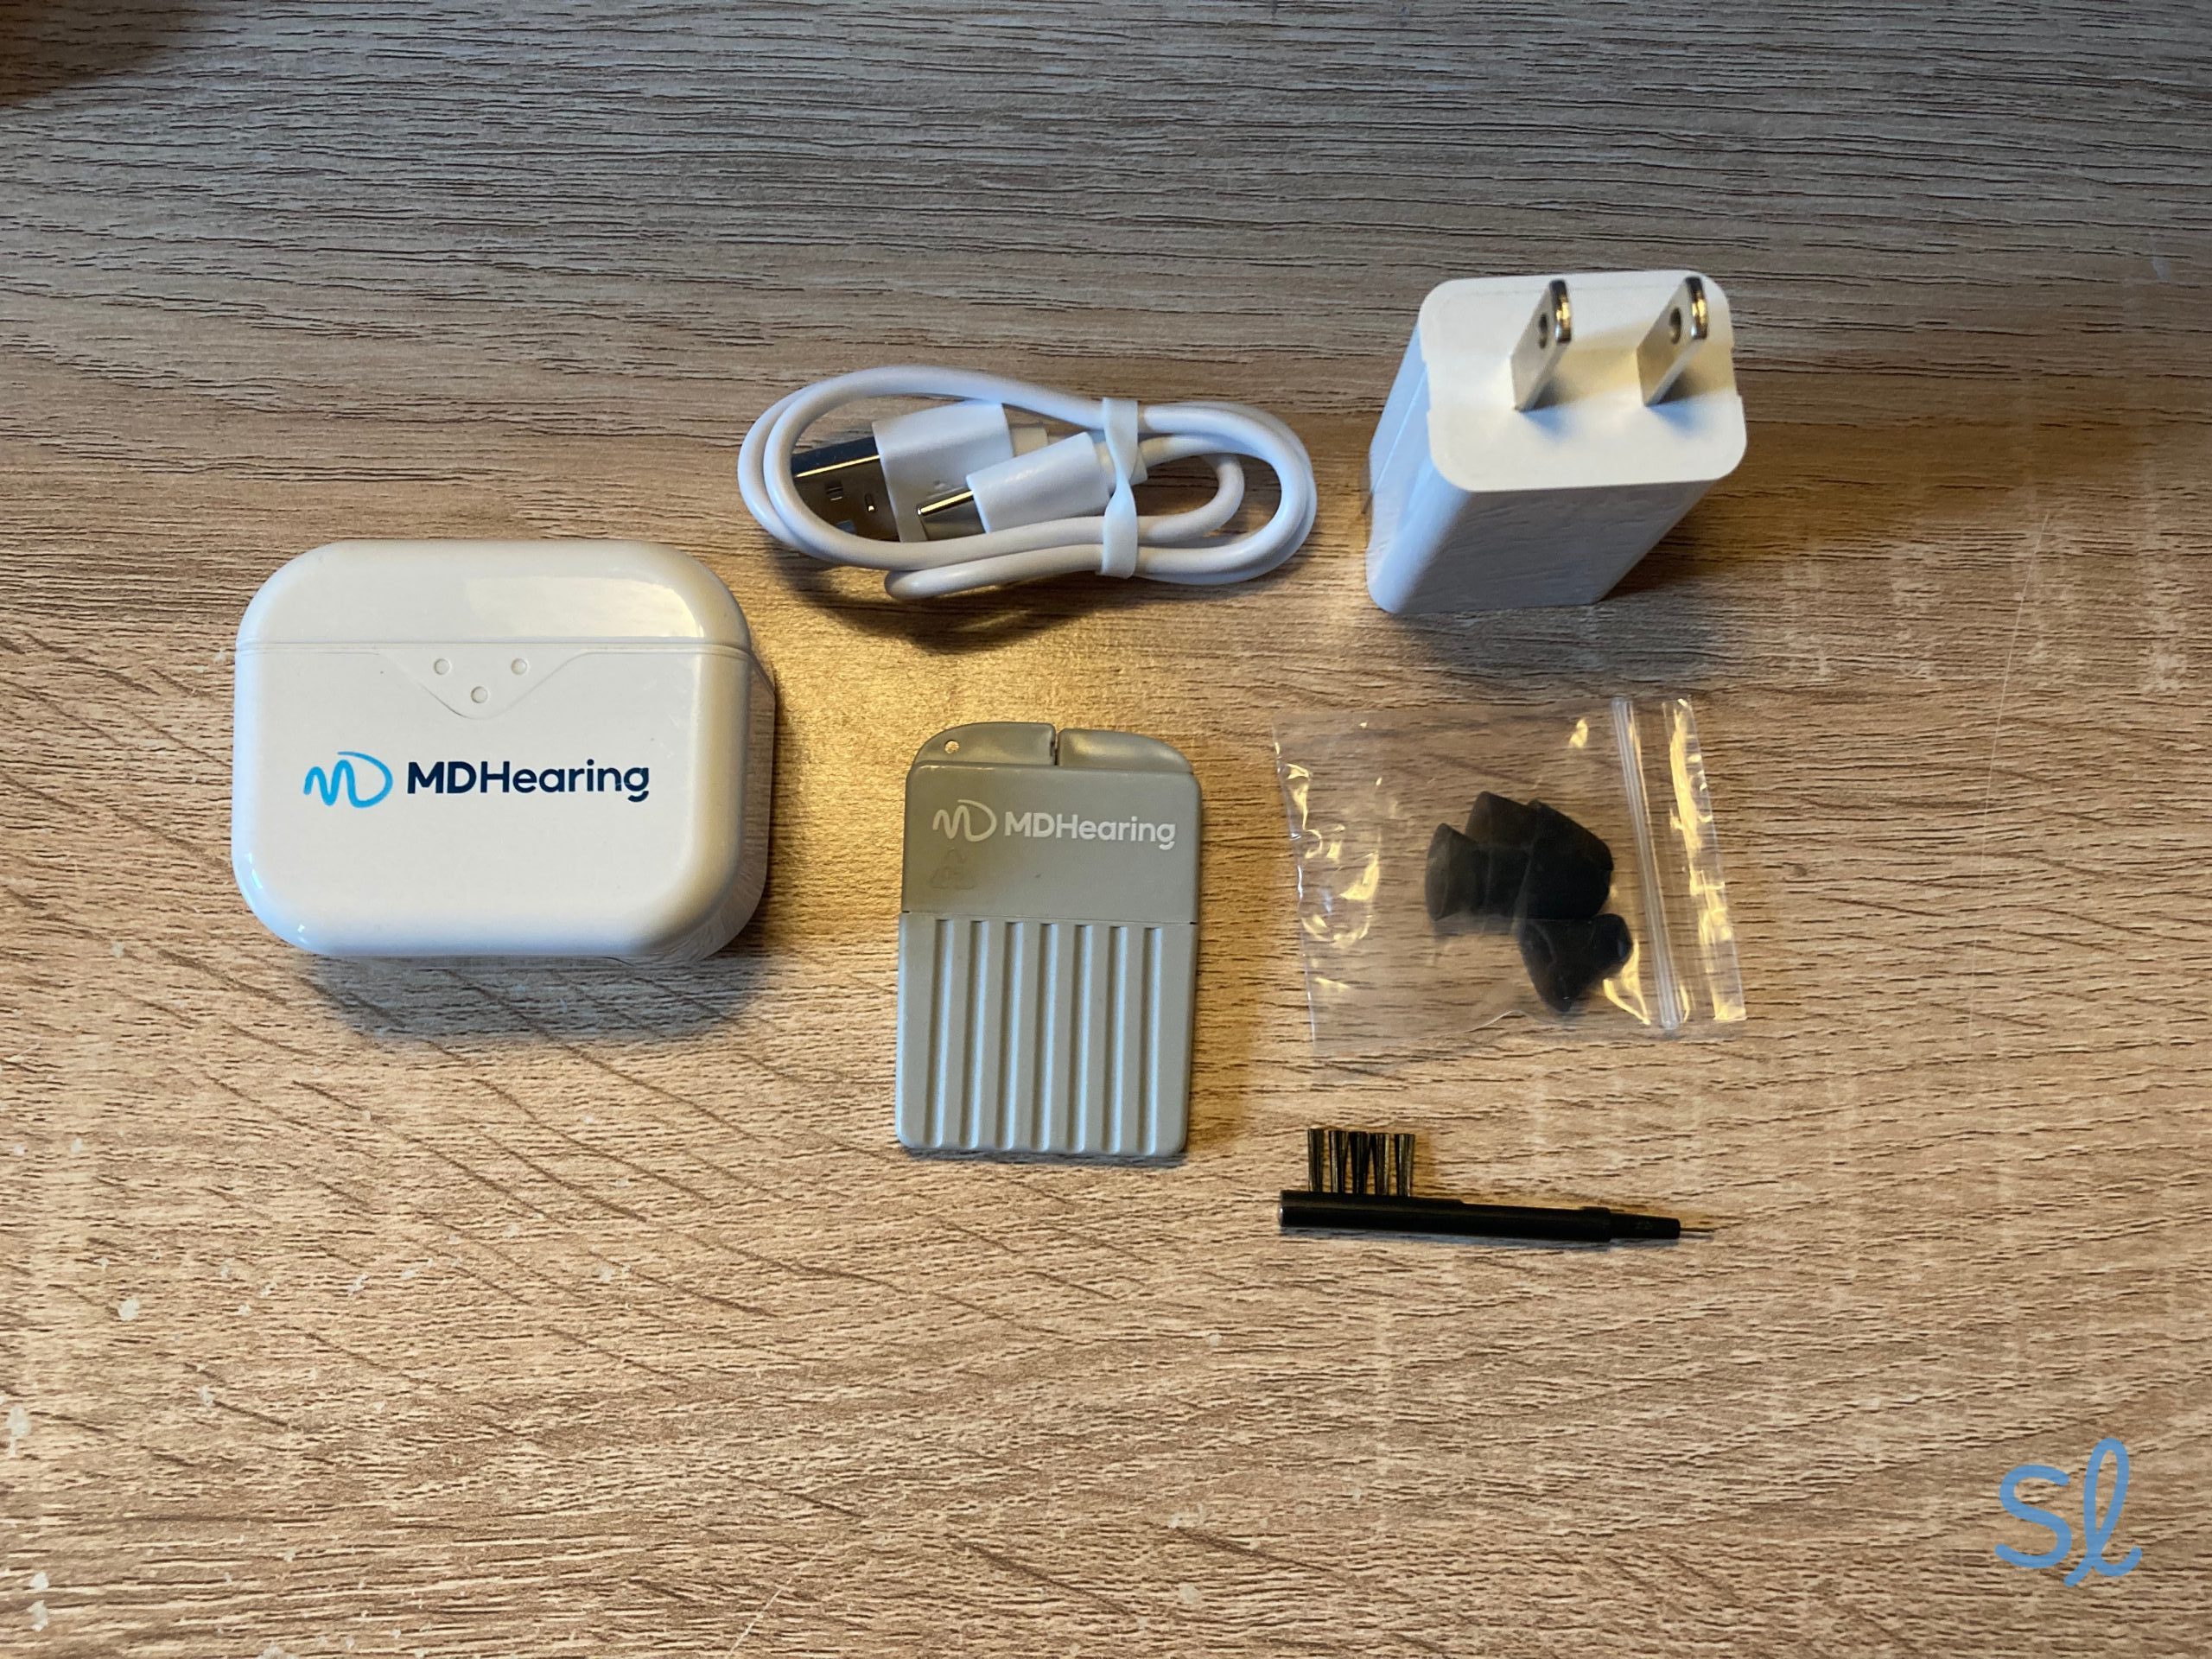 Everything included in my NEO XS package from MDHearing